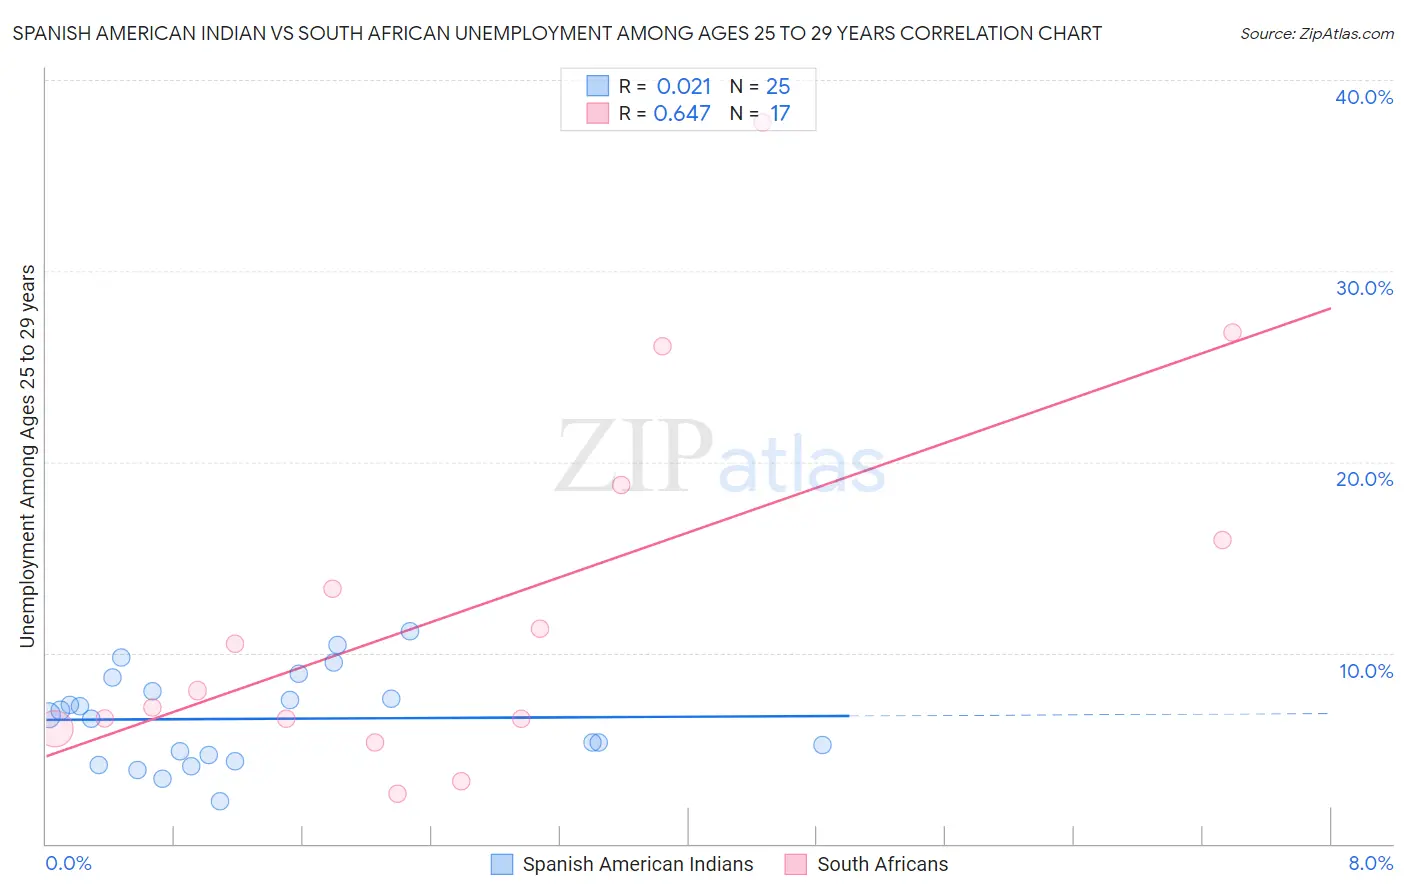 Spanish American Indian vs South African Unemployment Among Ages 25 to 29 years